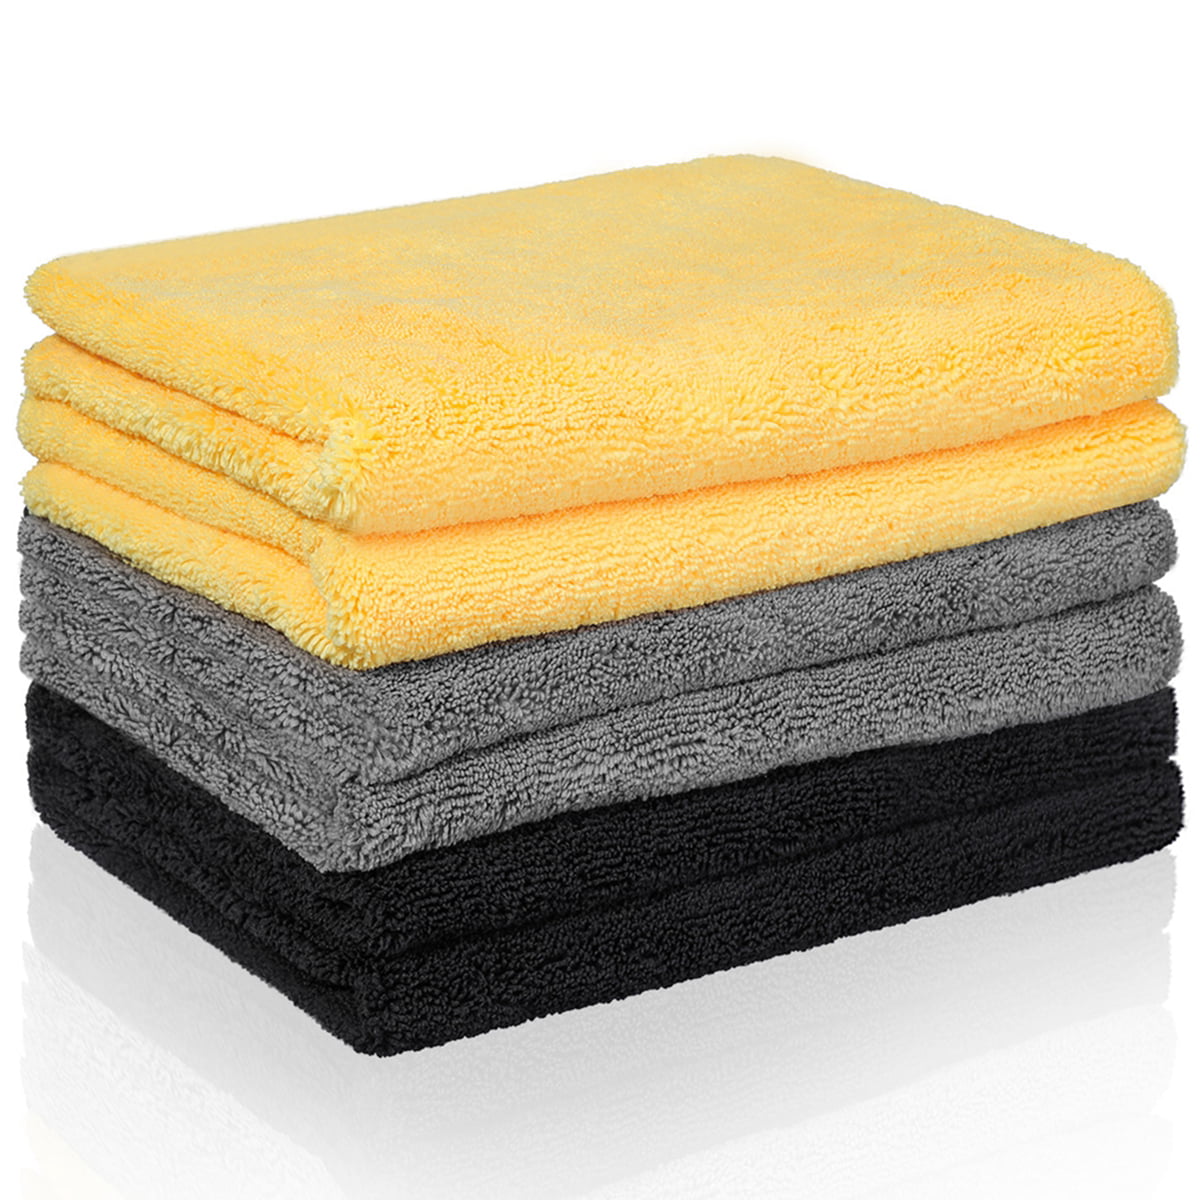 4 Pack ,Gray Microfibre Car Cleaning Cloths Upgraded 1200 GSM Ultra-Thick Car Drying Towel Microfiber Cloth for Car and Home Polishing Washing and Detailing 16 x 16 